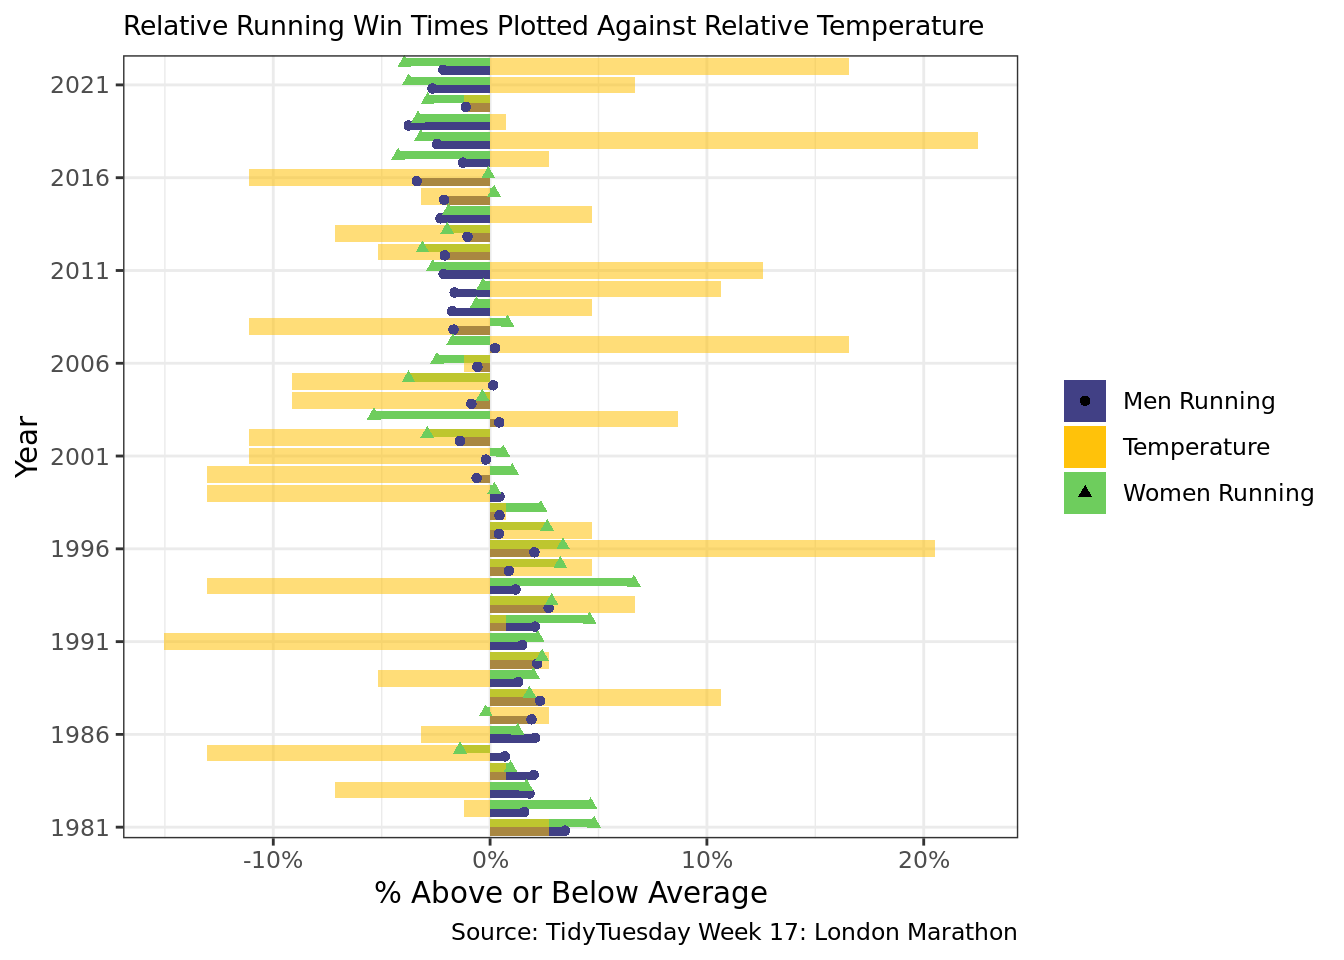 This figure is a column graph titled “Relative Running Win Times Plotted Against Relative Temperature” that displays relative win times for Men’s and Women’s Running along with the relative average temperature by year. The plot shows that 2018 had the highest relative temperature and 1991 had the lowest.